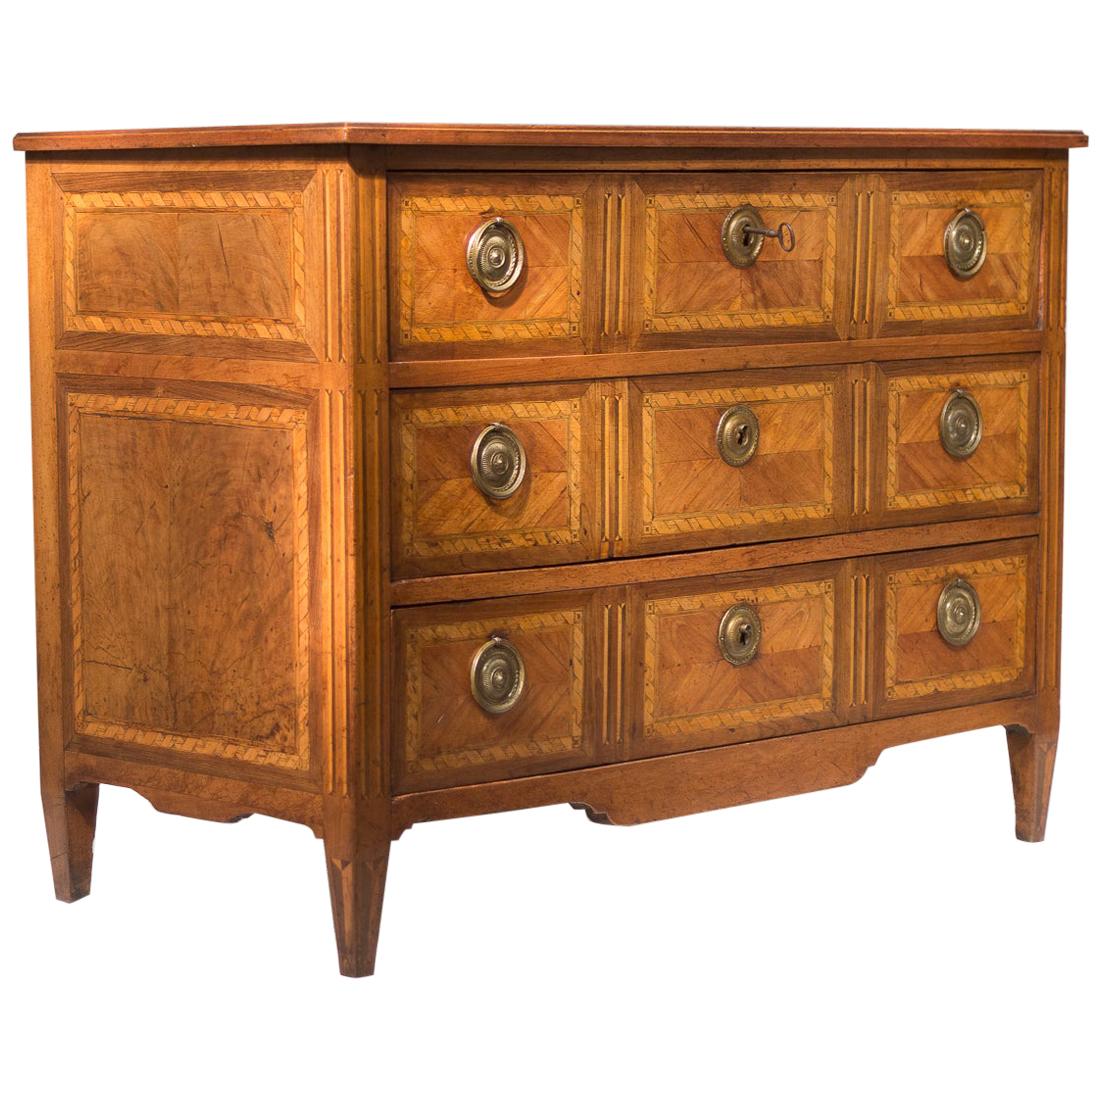 18th Century Italian Walnut and Kingwood Chest of Drawers